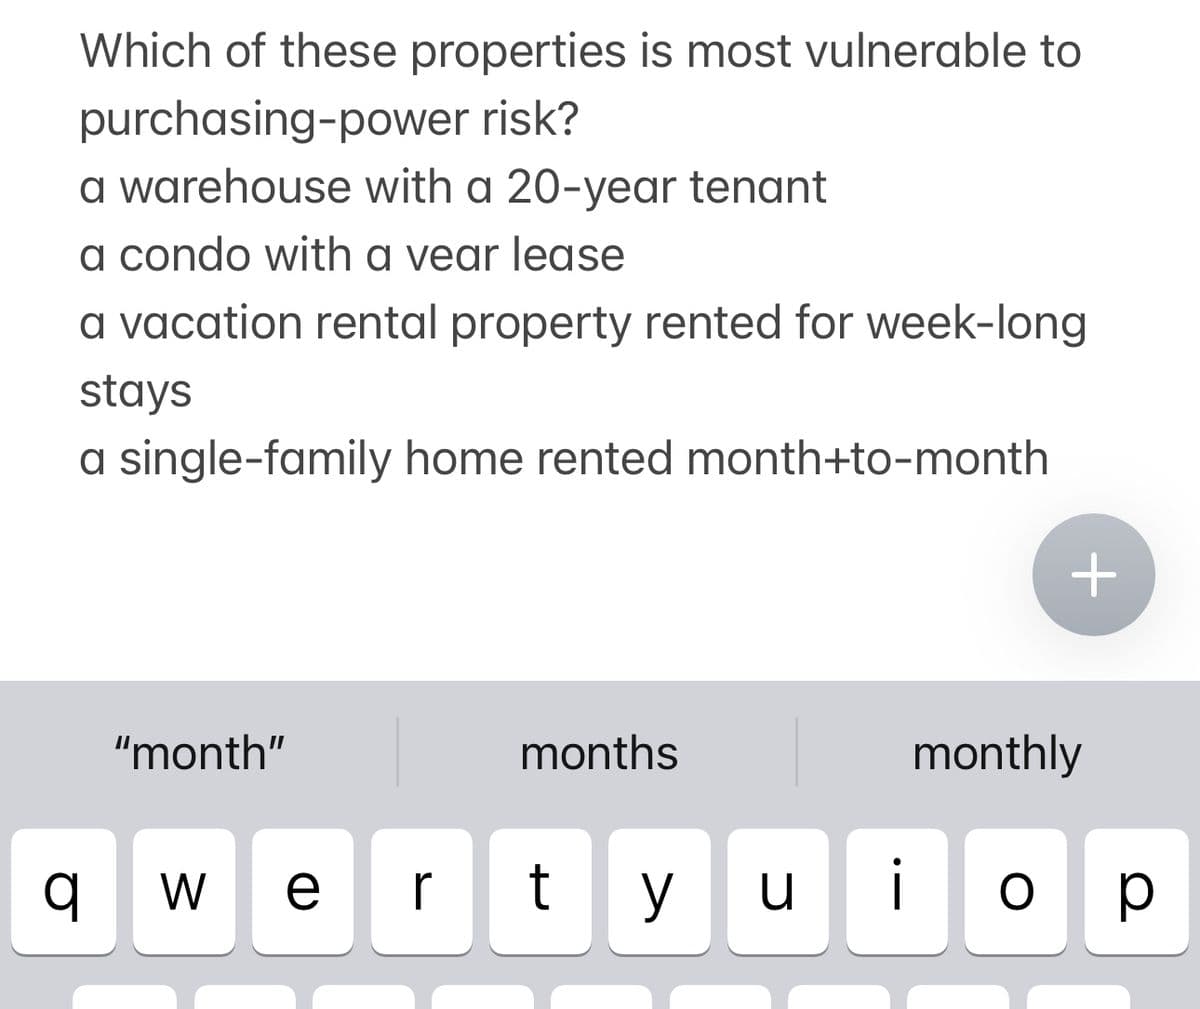 Which of these properties is most vulnerable to
purchasing-power risk?
a warehouse with a 20-year tenant
a condo with a vear lease
a vacation rental property rented for week-long
stays
a single-family home rented month+to-month
q
"month"
months
W
+
monthly
vertyuioP